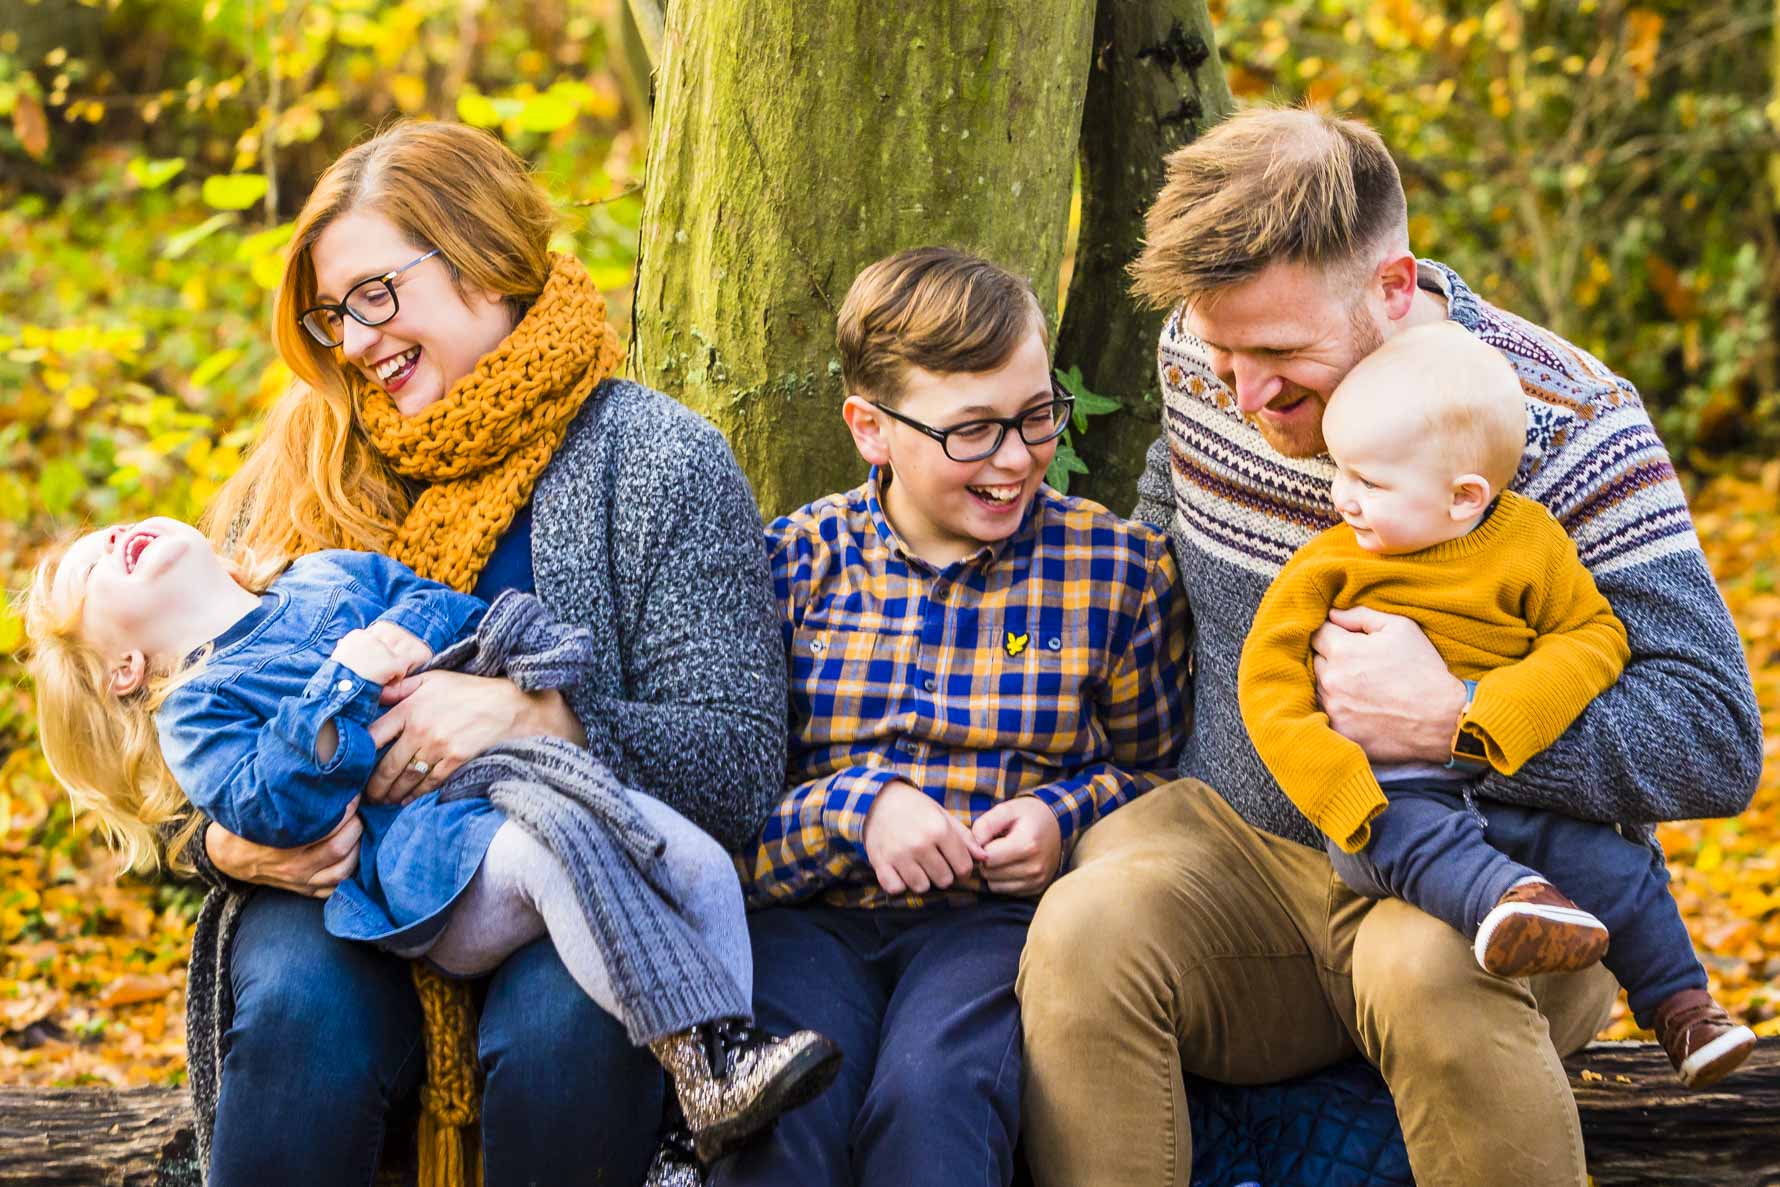 Two parents and three children laugh as they tickle one another in the autumn woodland